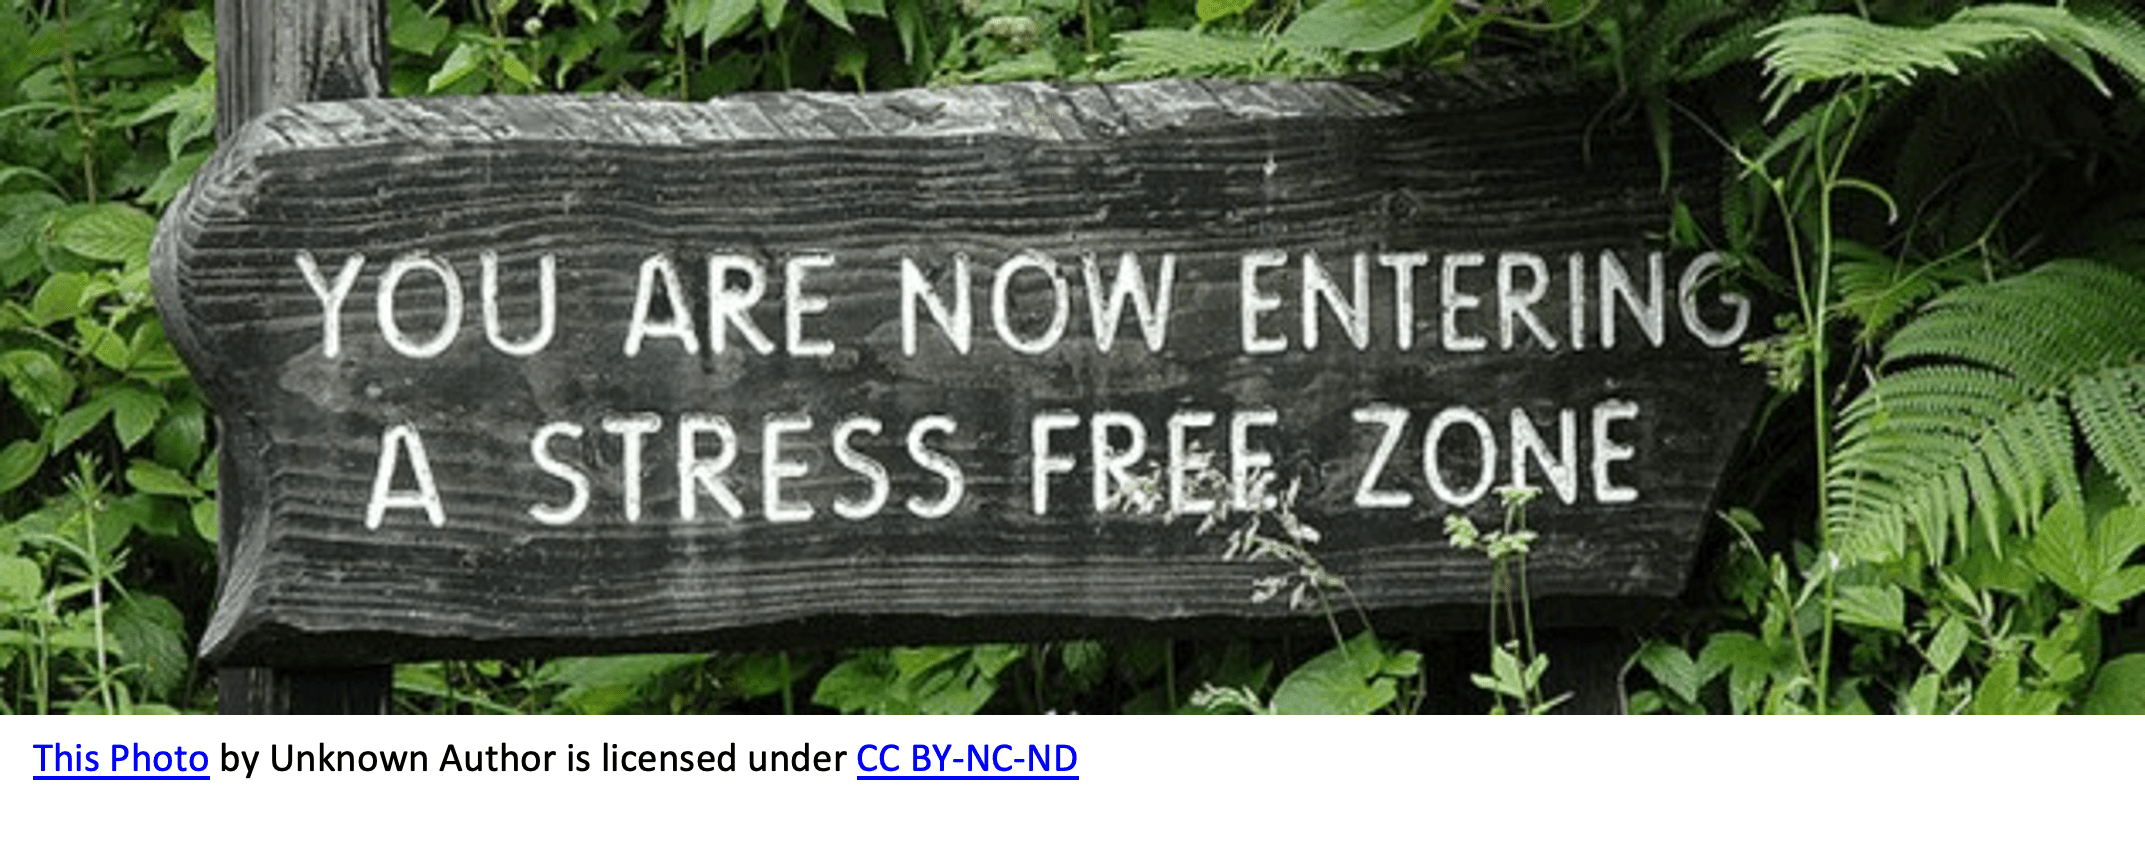 you are now entering a stress-free zone.